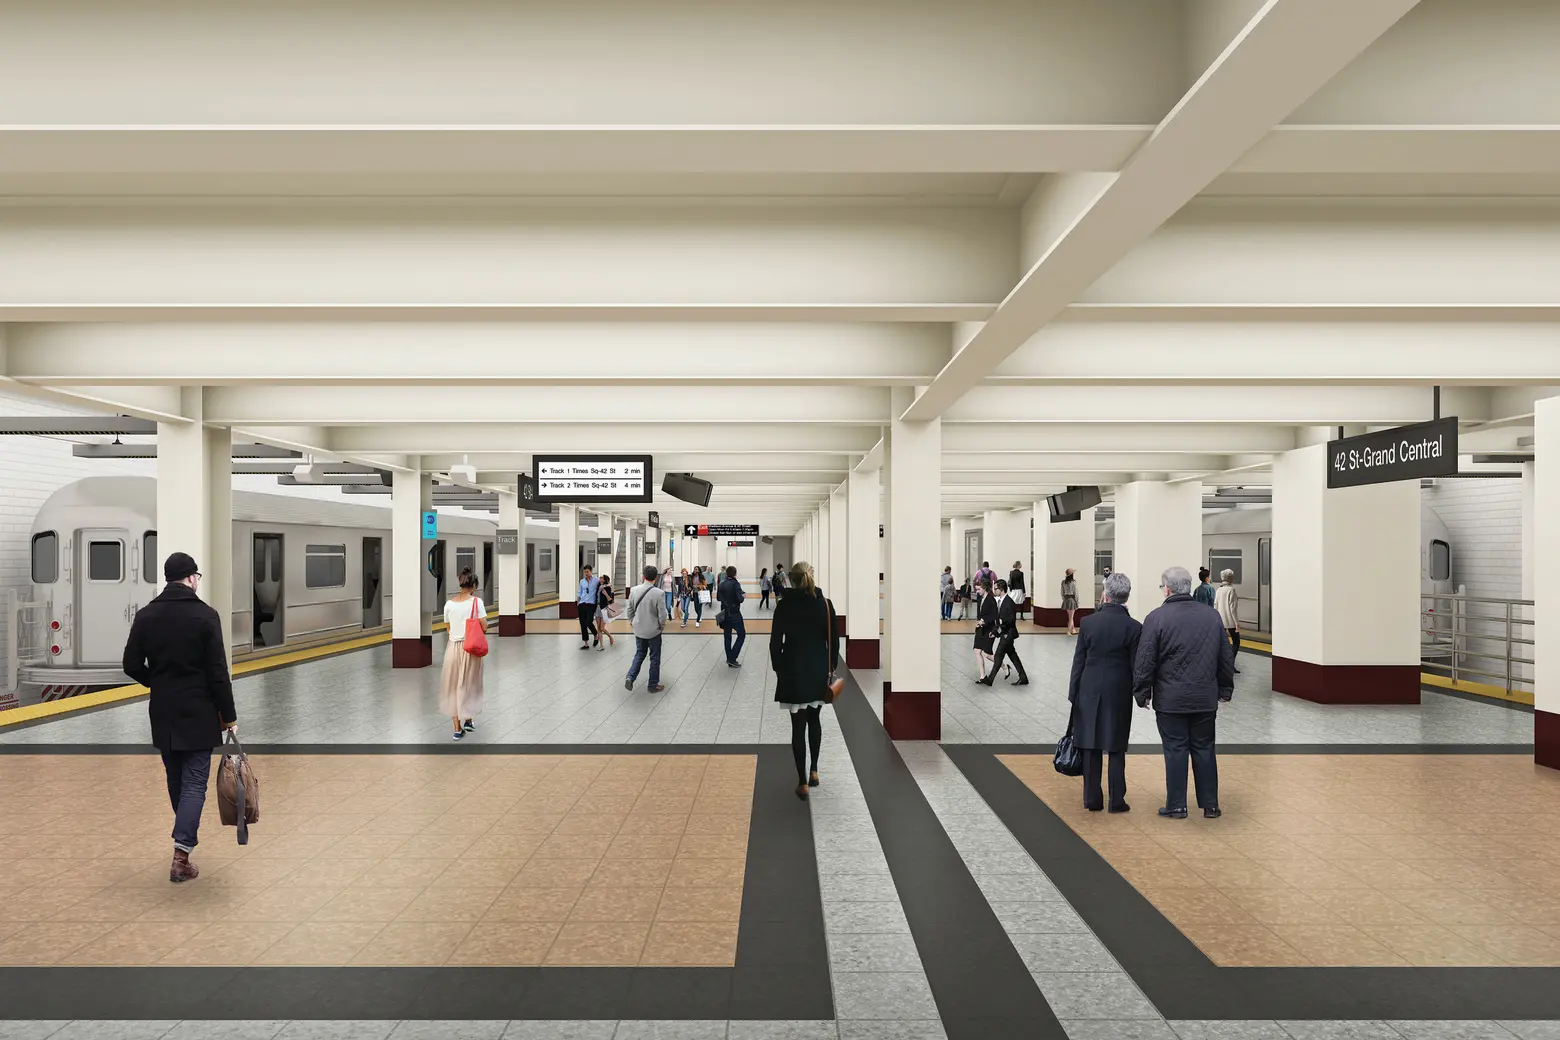 MTA announces $750M plan to overhaul 42nd Street subway stations